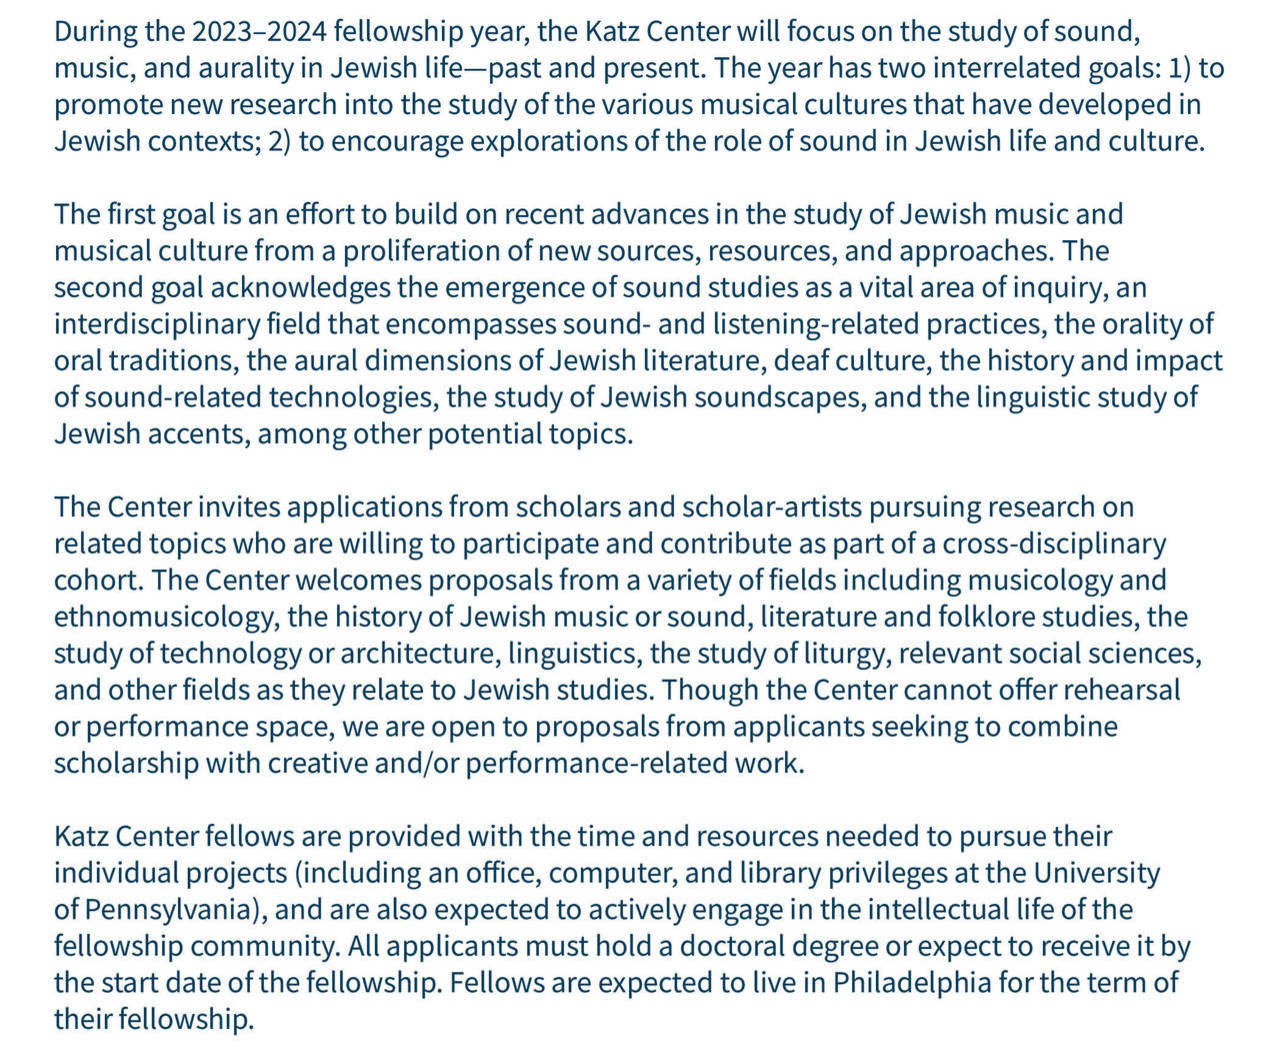 The Sound and Music of Jewish Life: 2023–2024 Fellowship Theme Description